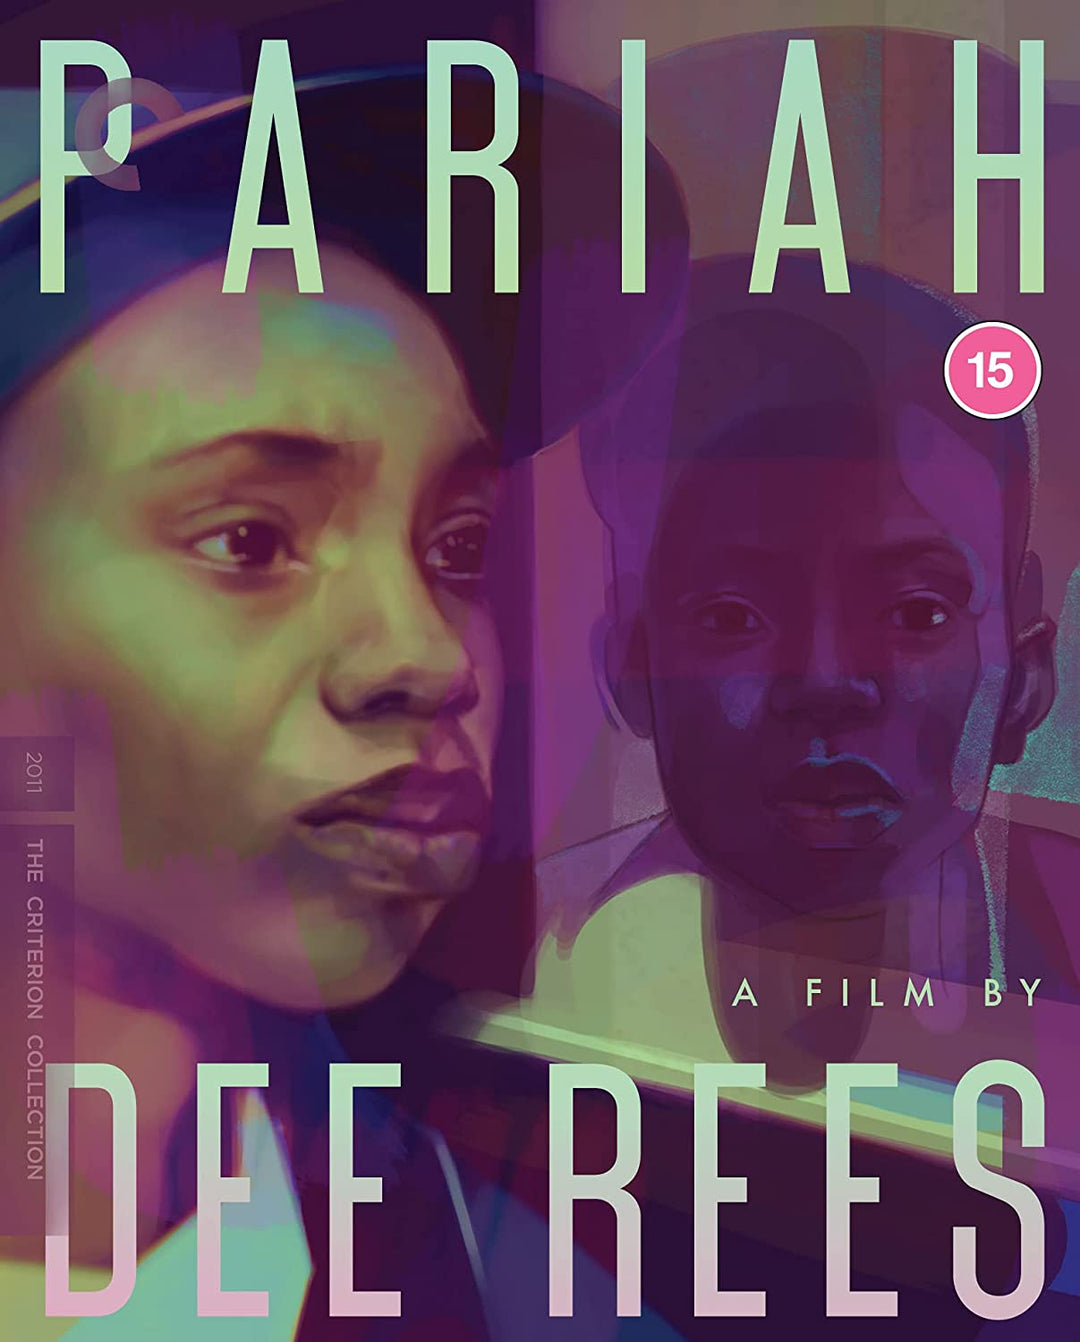 Pariah (2011) (Criterion Collection) UK Only [Blu-ray]